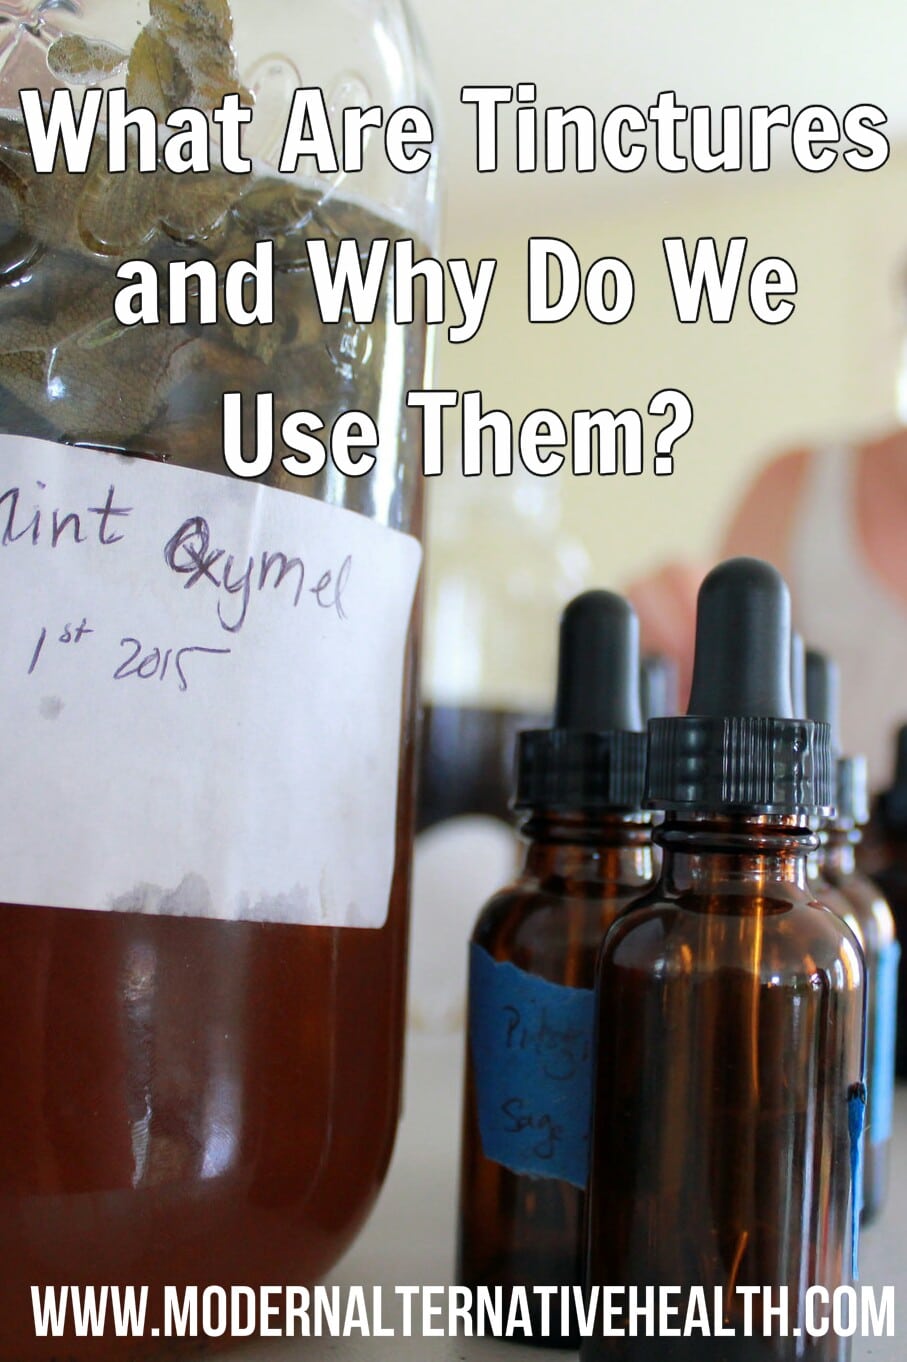 What are Tinctures and Why Do We Use Them?